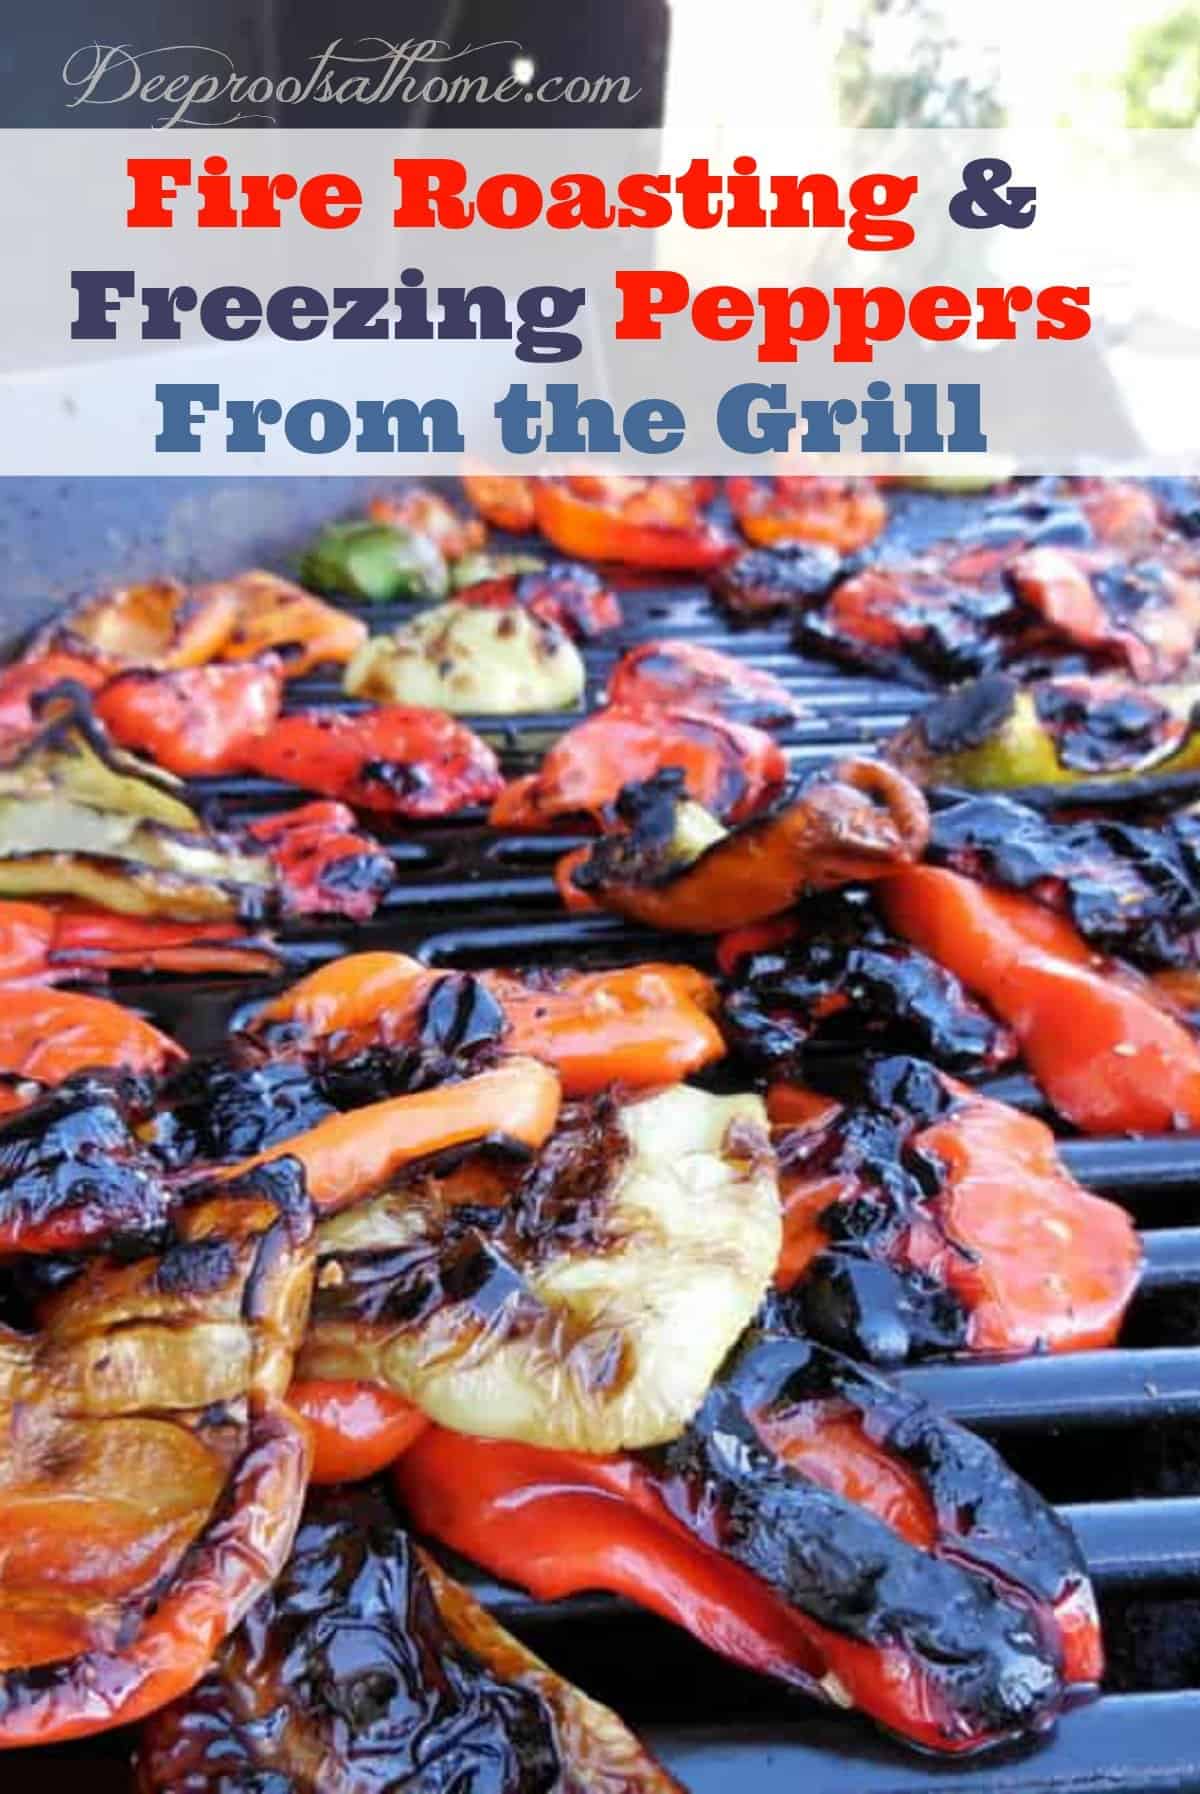 Fire Roasting And Freezing Colored Peppers From the Grill